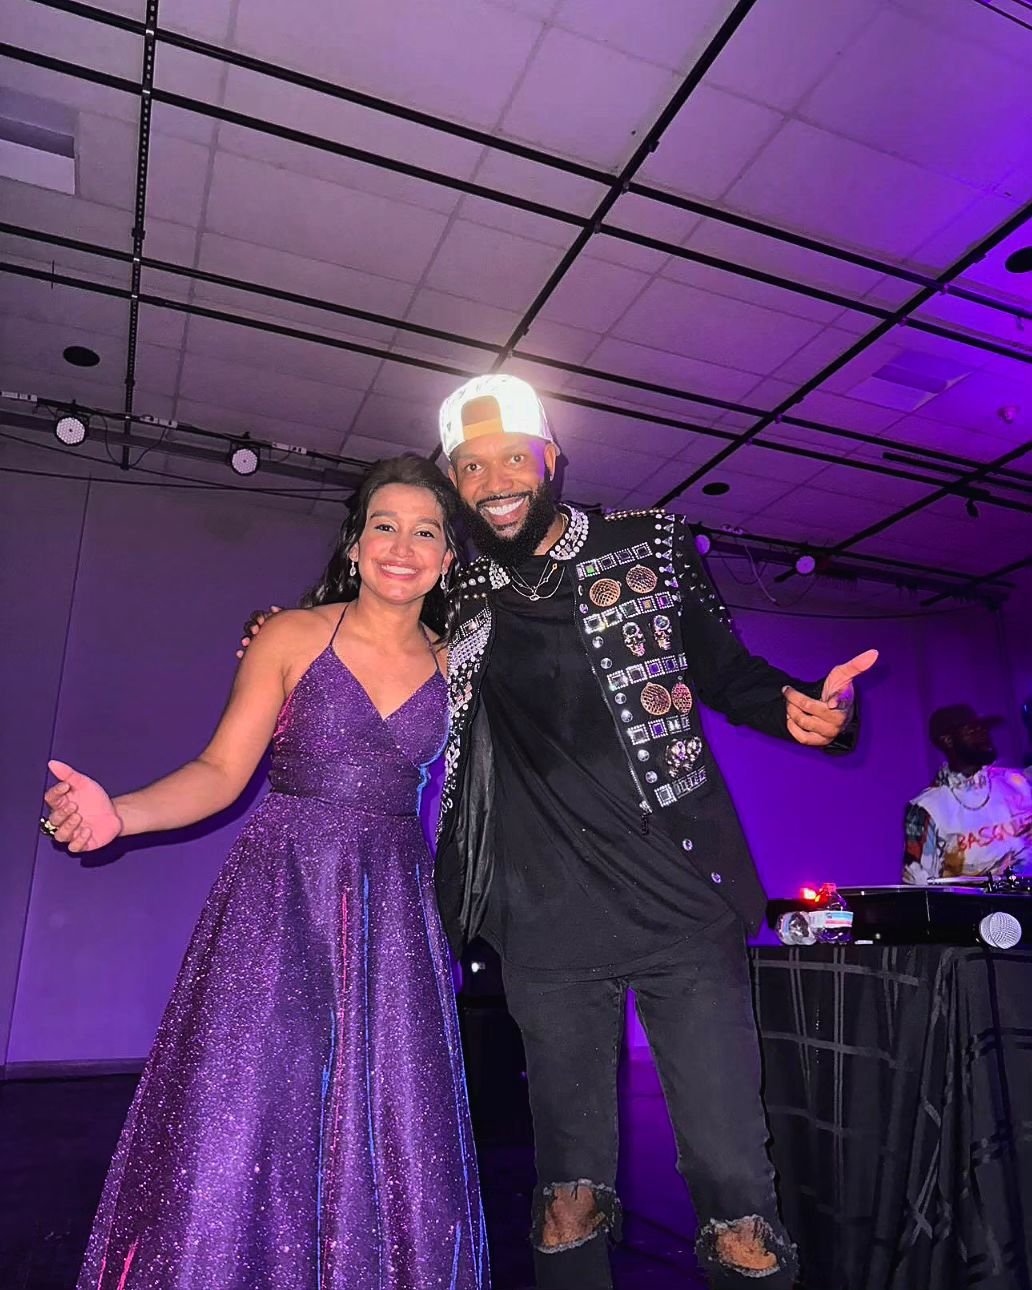 Big shouts to @itzkhushipatil for everything!! Central Prom was incredible!! Thank you again!! Also if you need me in Penn I'll make the trip for sure! #Prom24 #centralhighschool #PartyWithNickHud #NickHudRadio